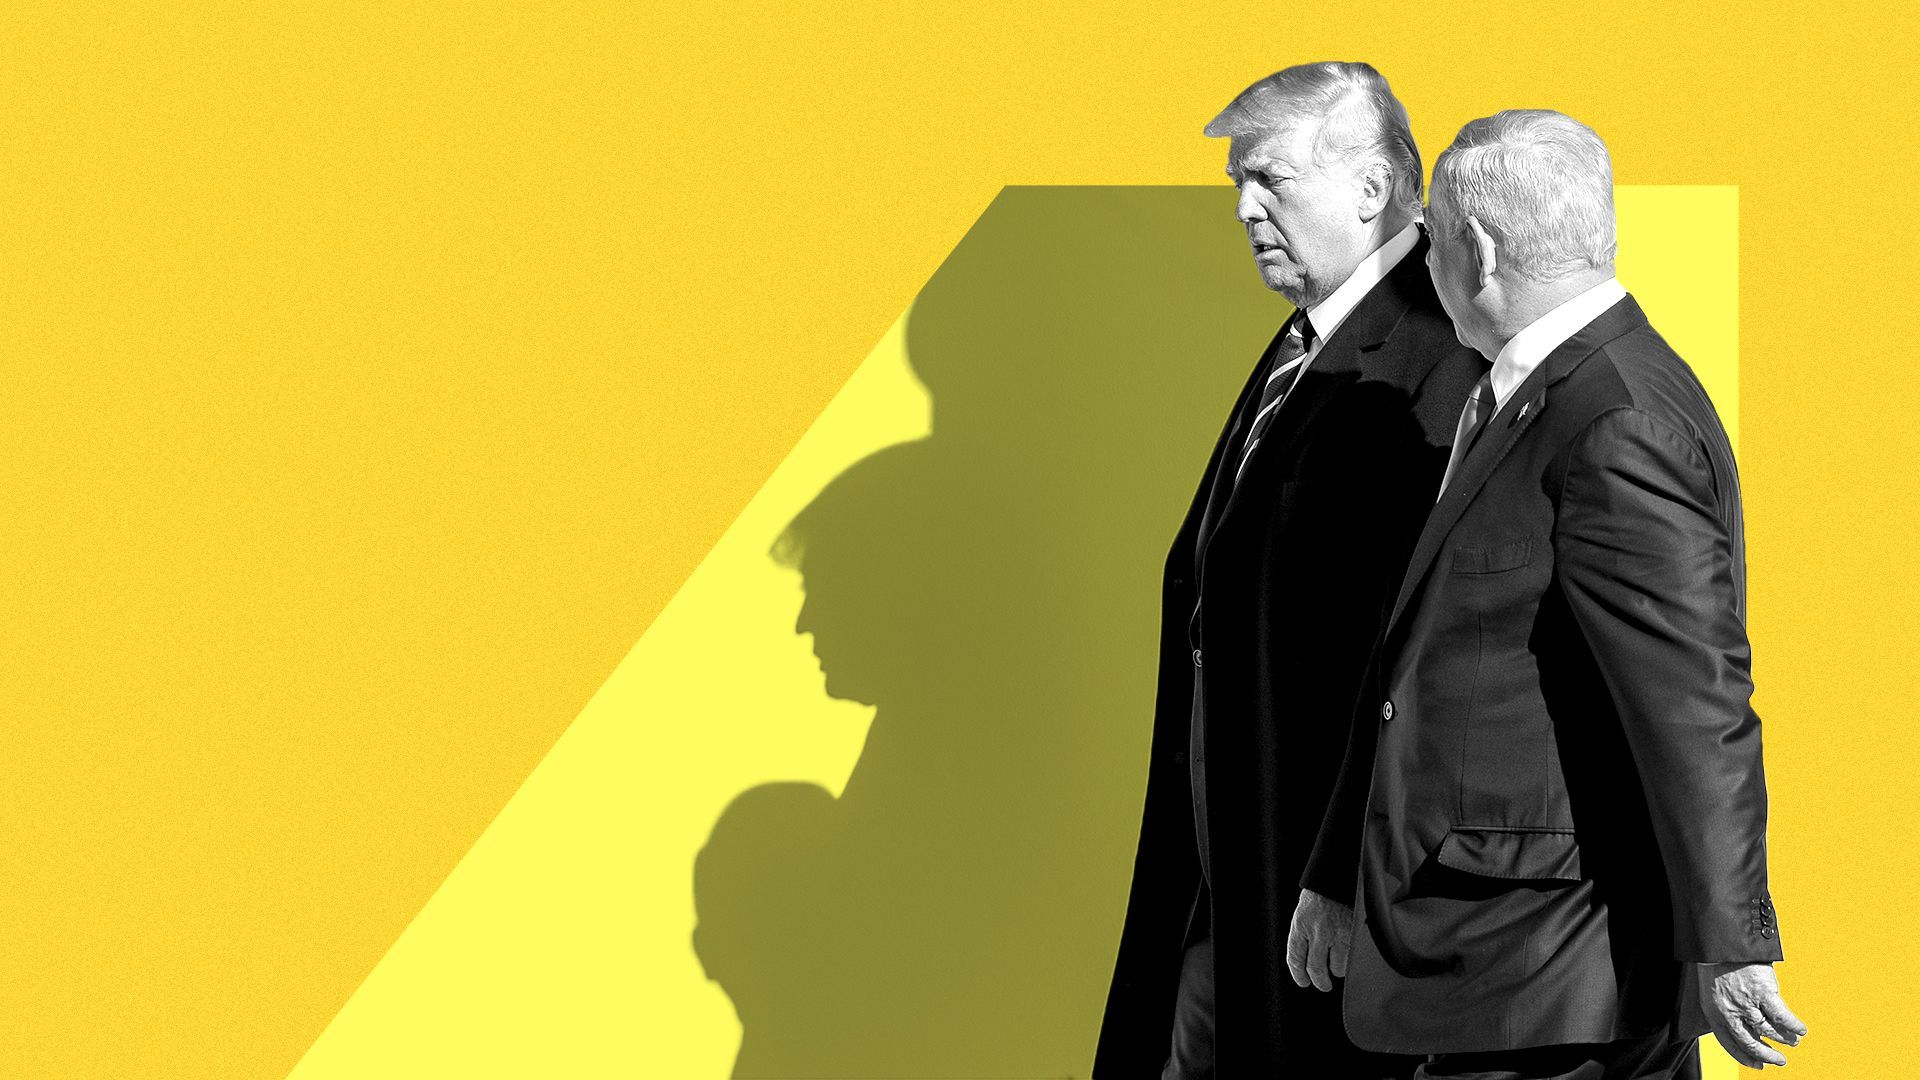 Photo illustration of Donald Trump walking with Benjamin Netanyahu set against their shadows and graphic shapes 